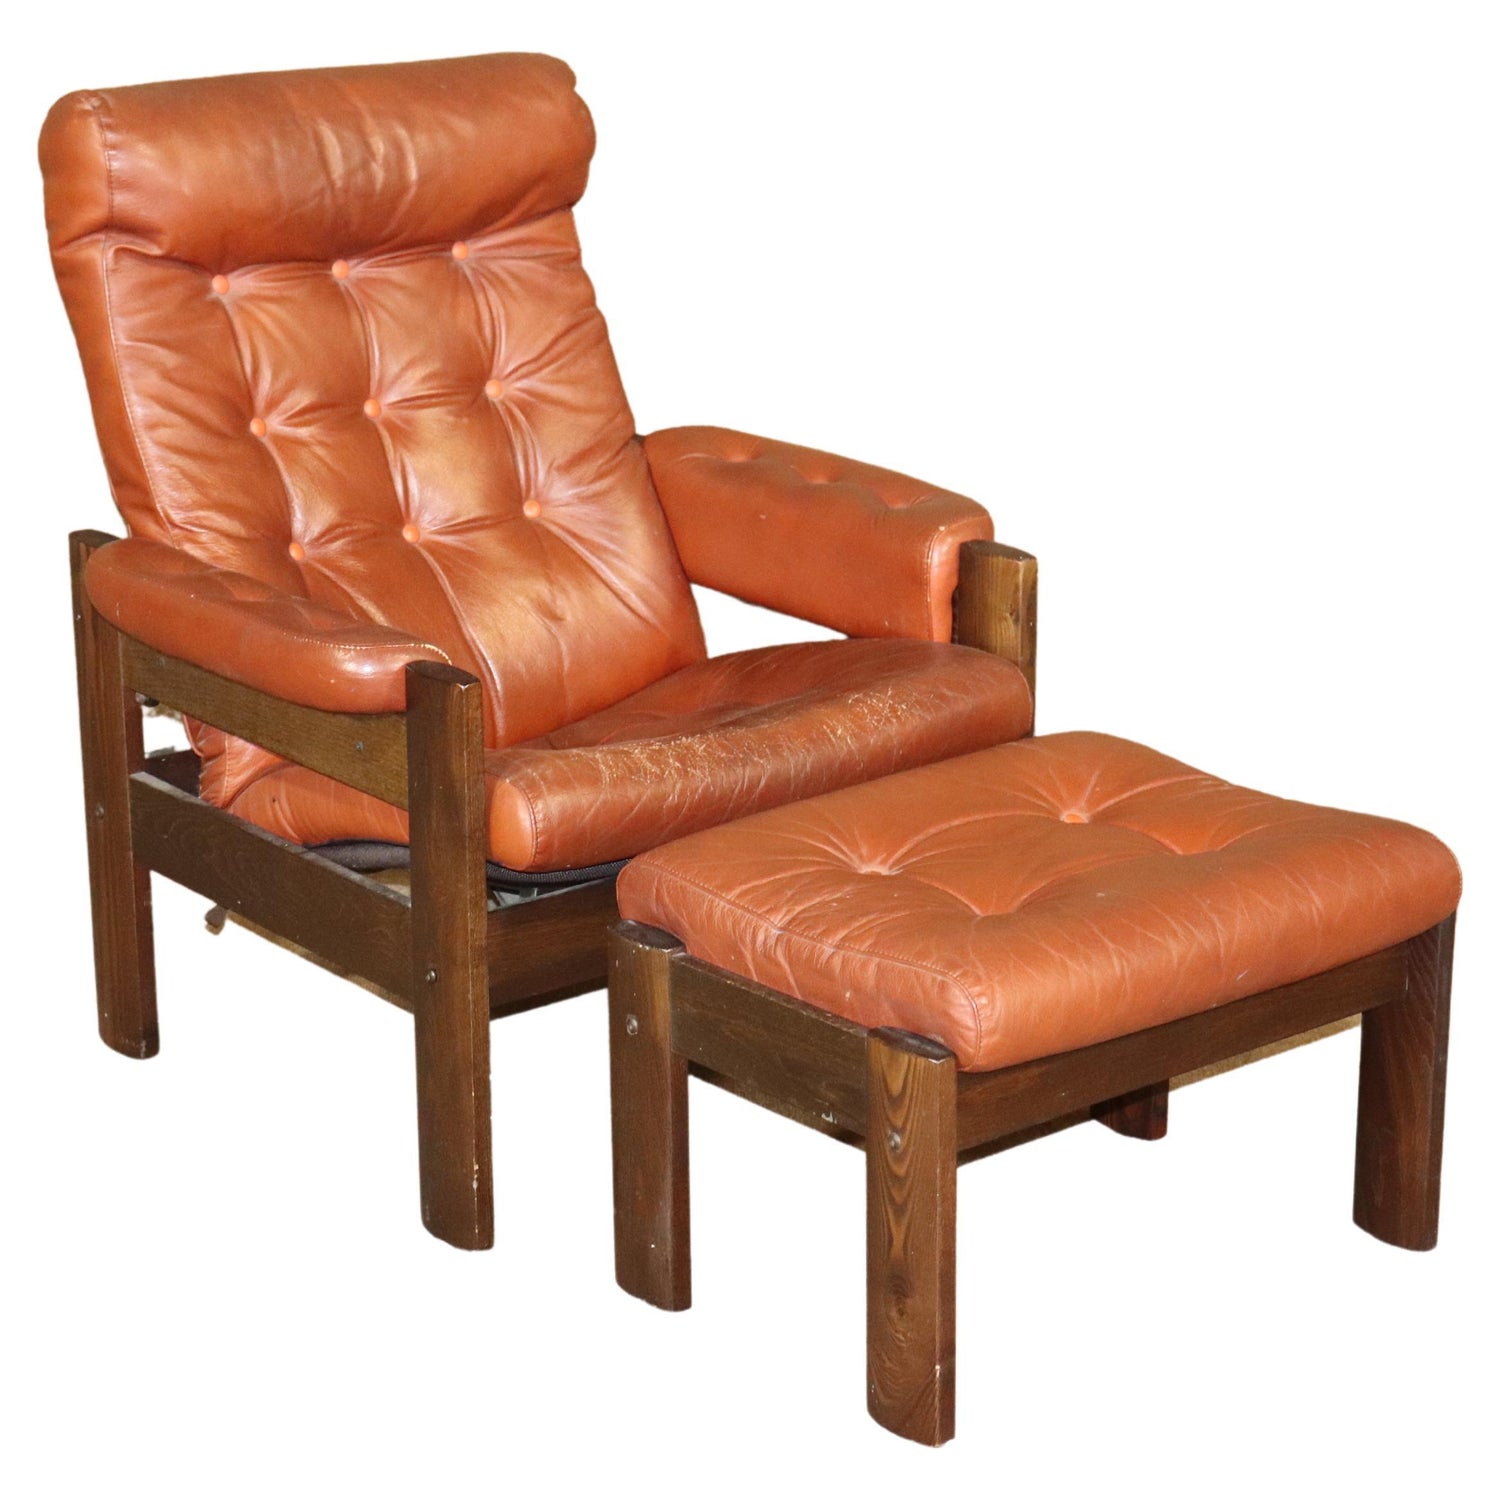 Midcentury Chrome and Leather Lounge Chair and Ottoman For Sale at